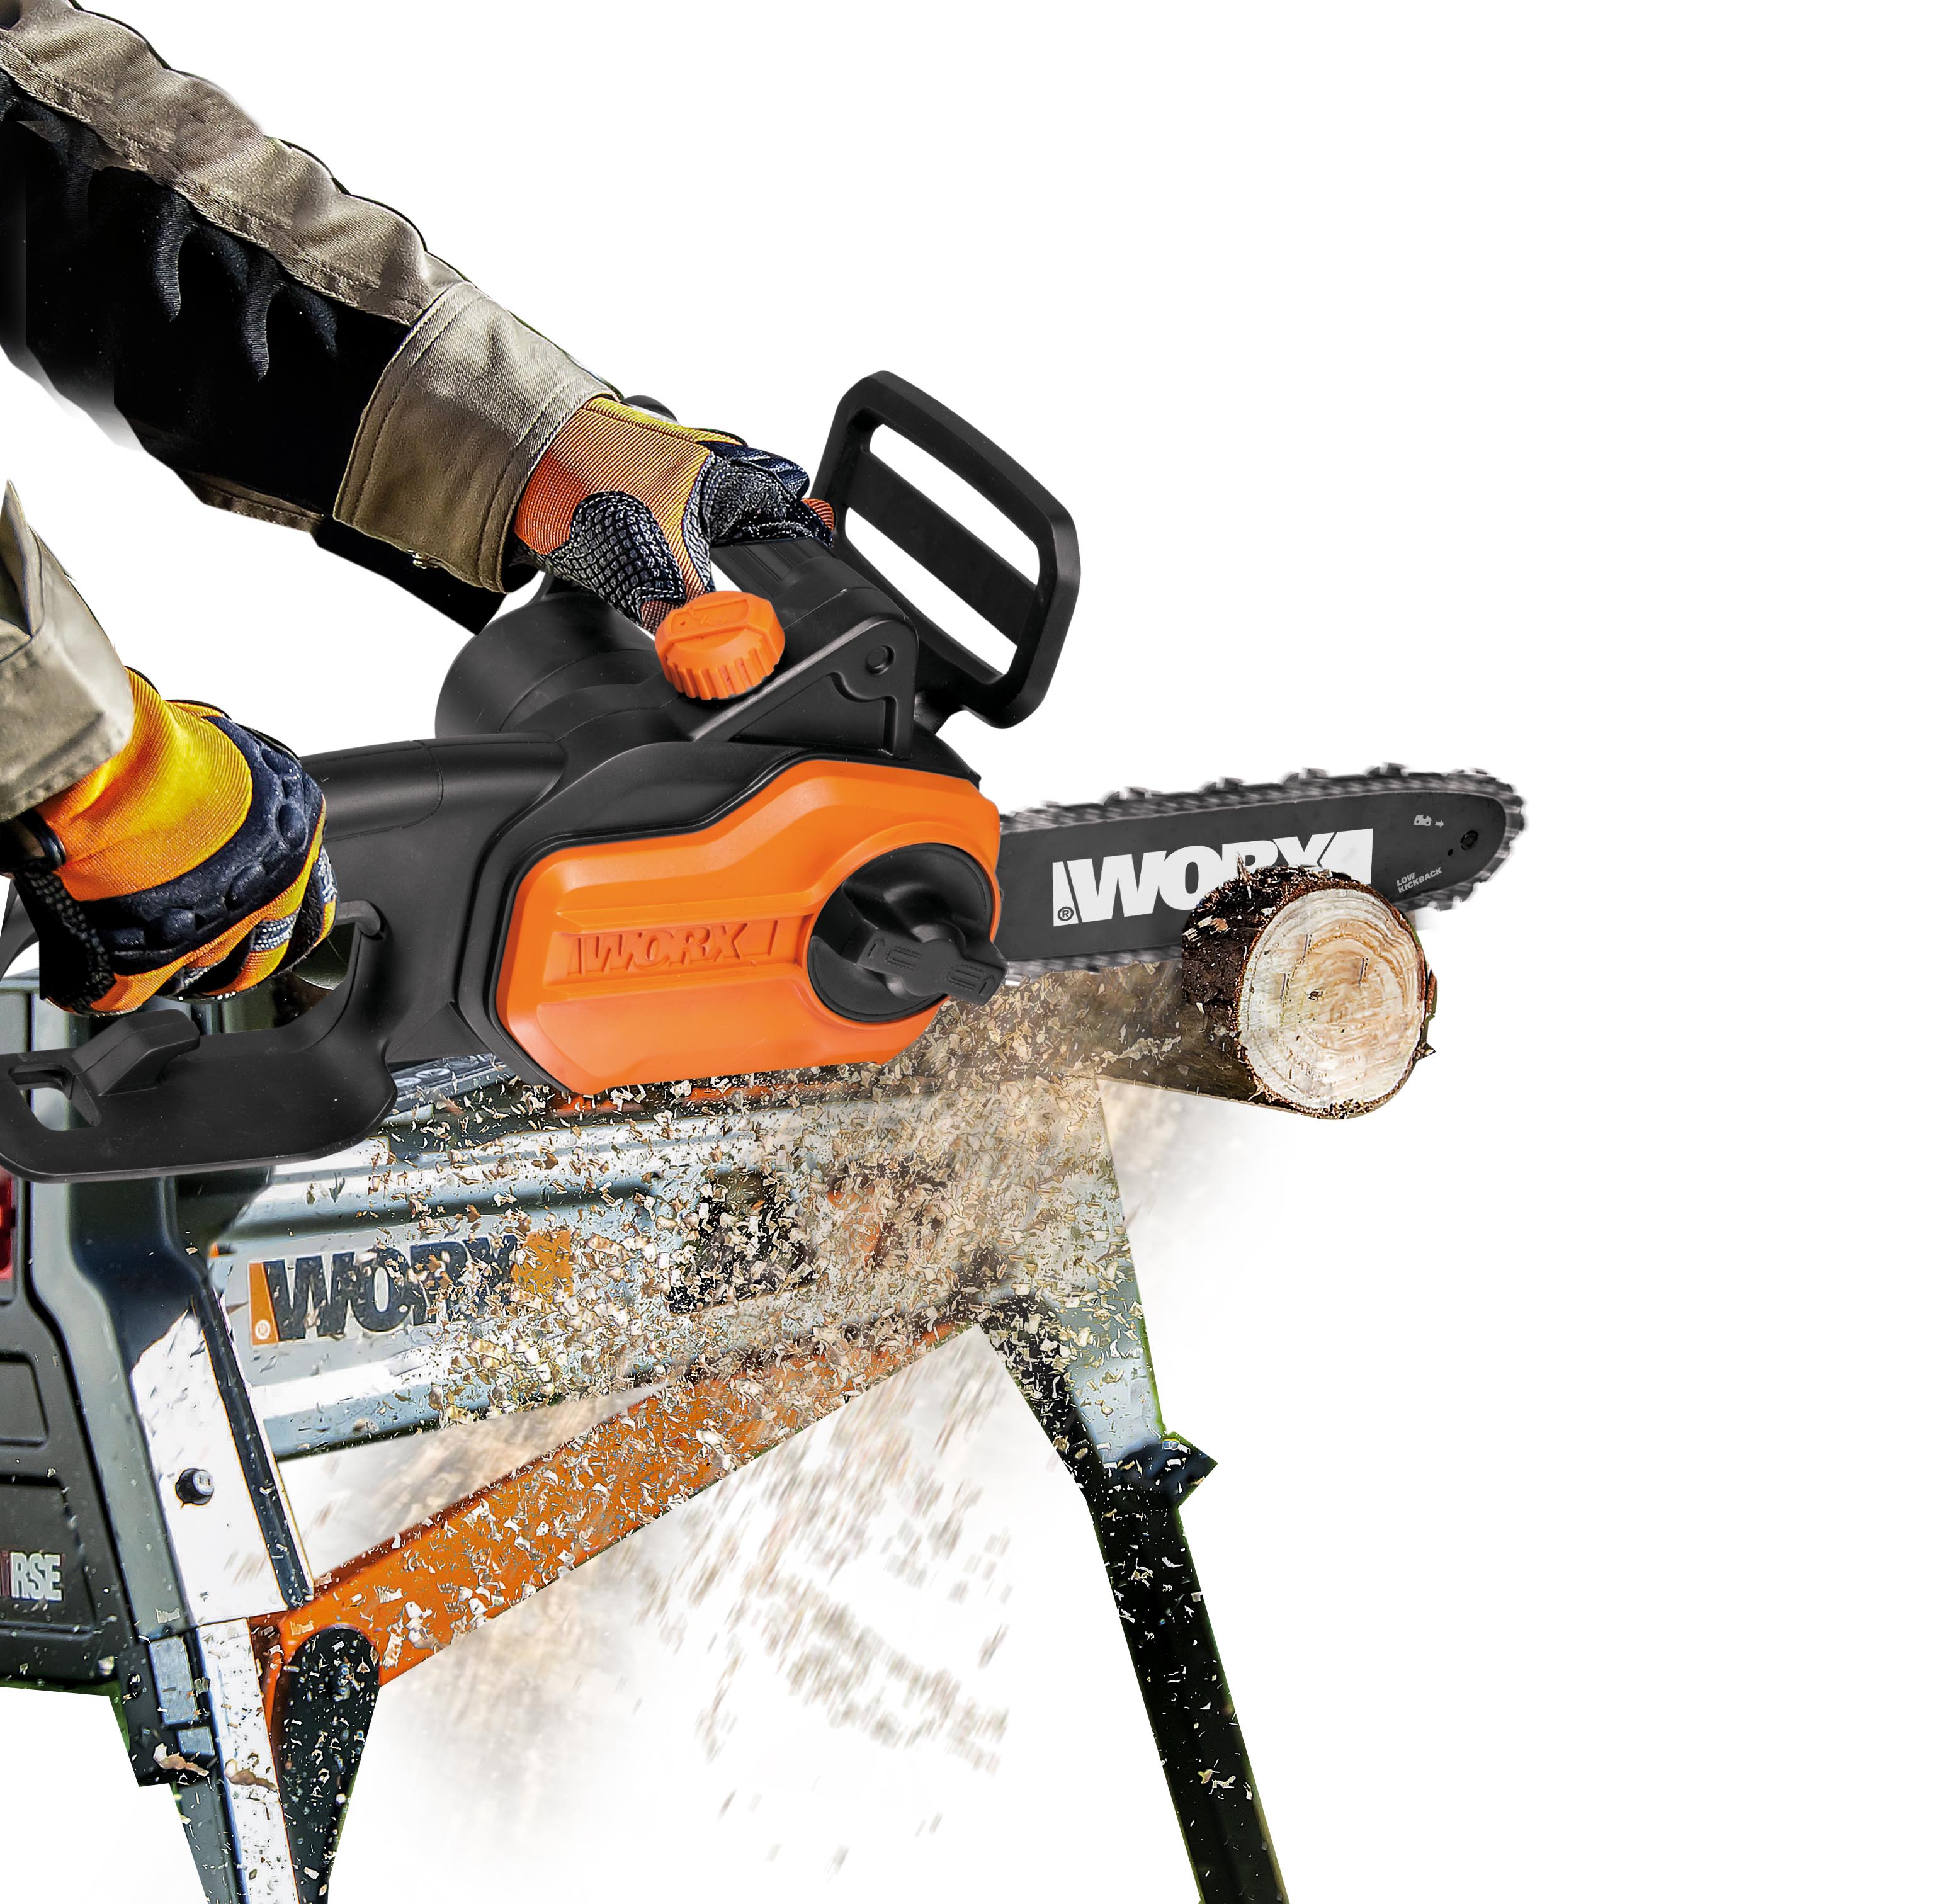 . WORX 10 in., 8A Electric Pole Saw detaches without tools from its extension pole for yard clean-up or cutting firewood.